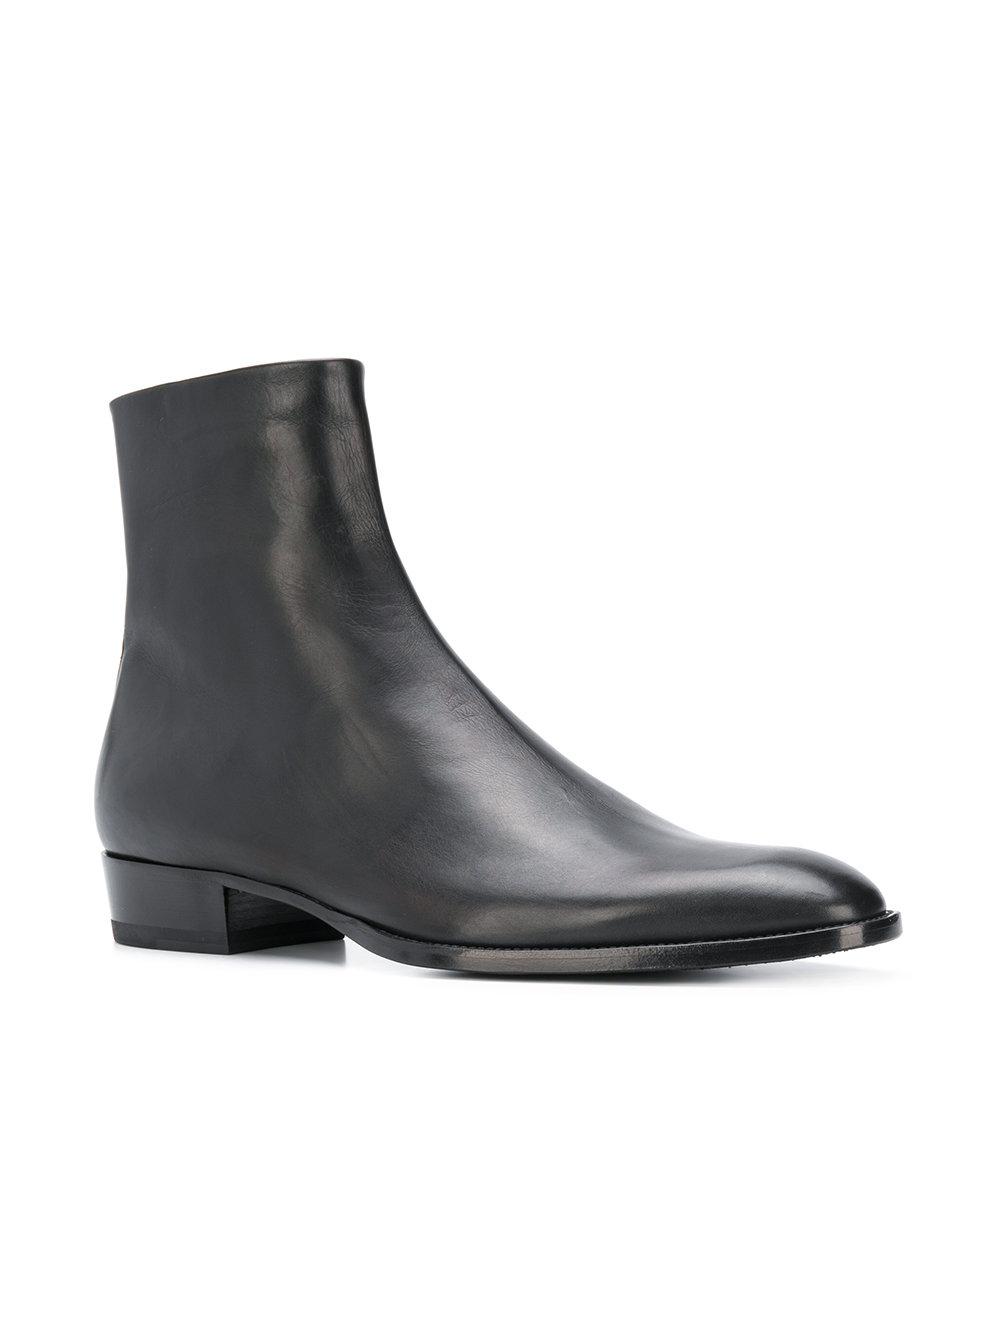 Saint Laurent Leather Side Zip Ankle Boots in Black for Men | Lyst